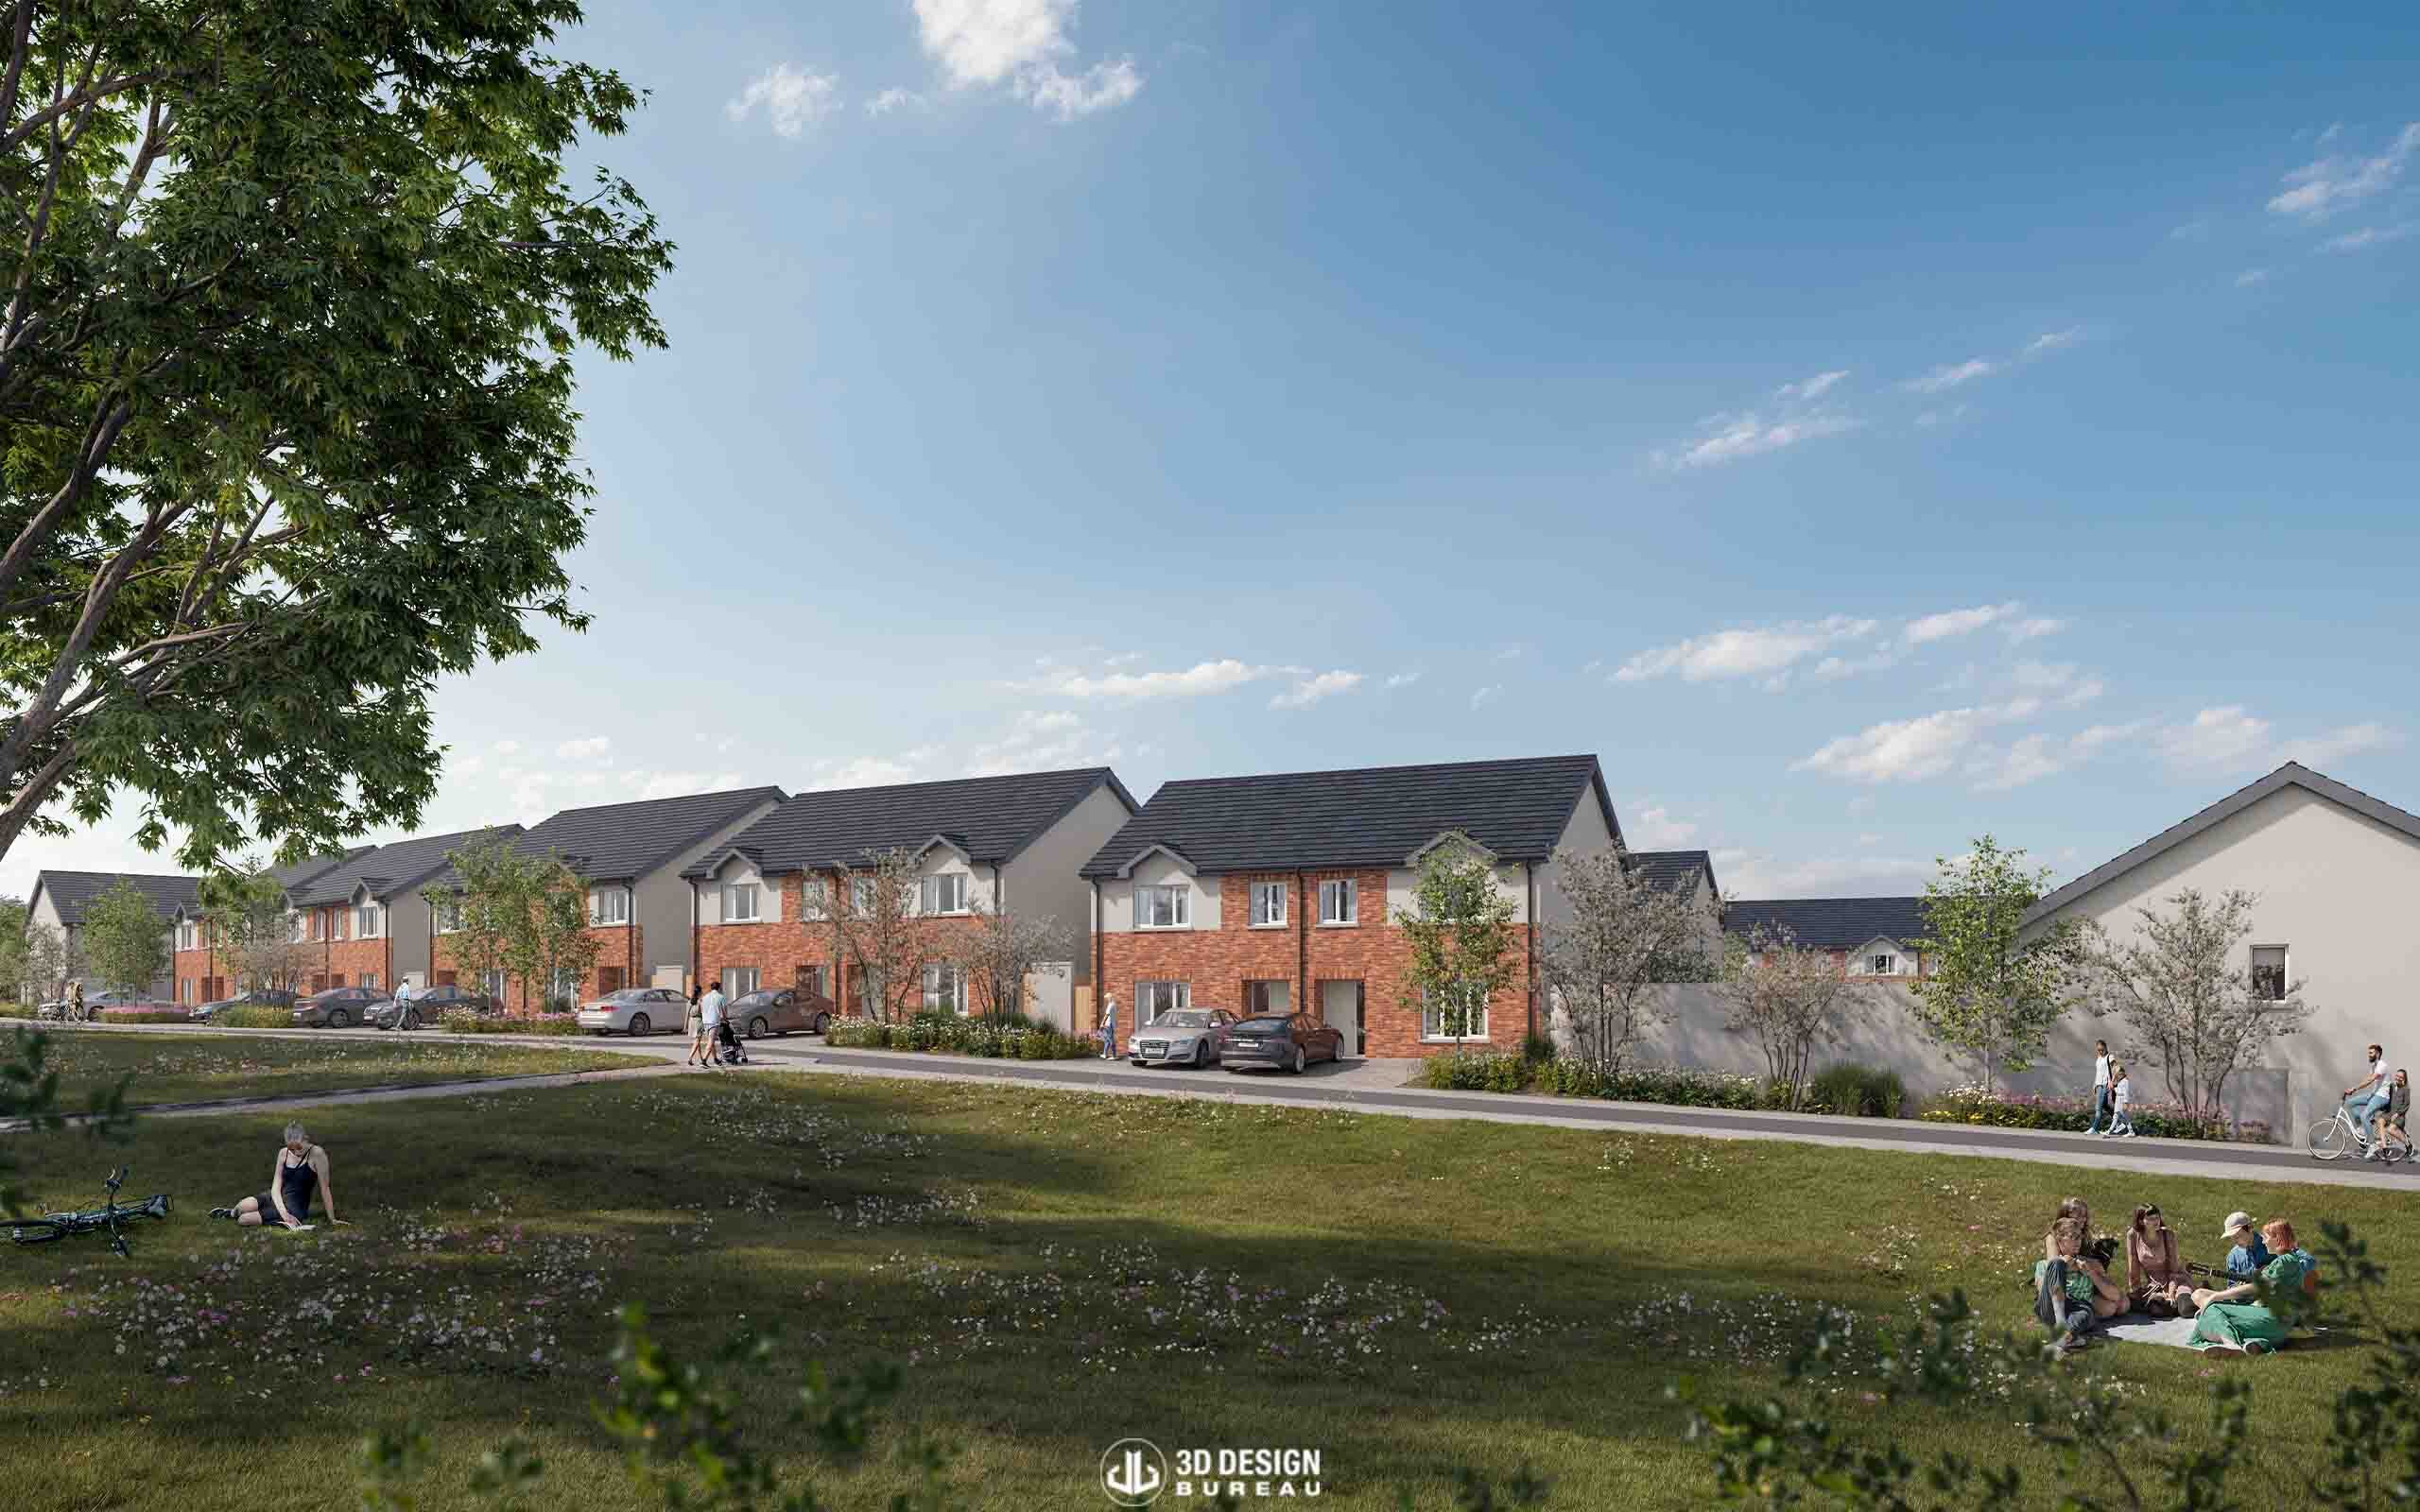 Computer generated imagery of the proposed housing development in Rathnew, Co.Wicklow